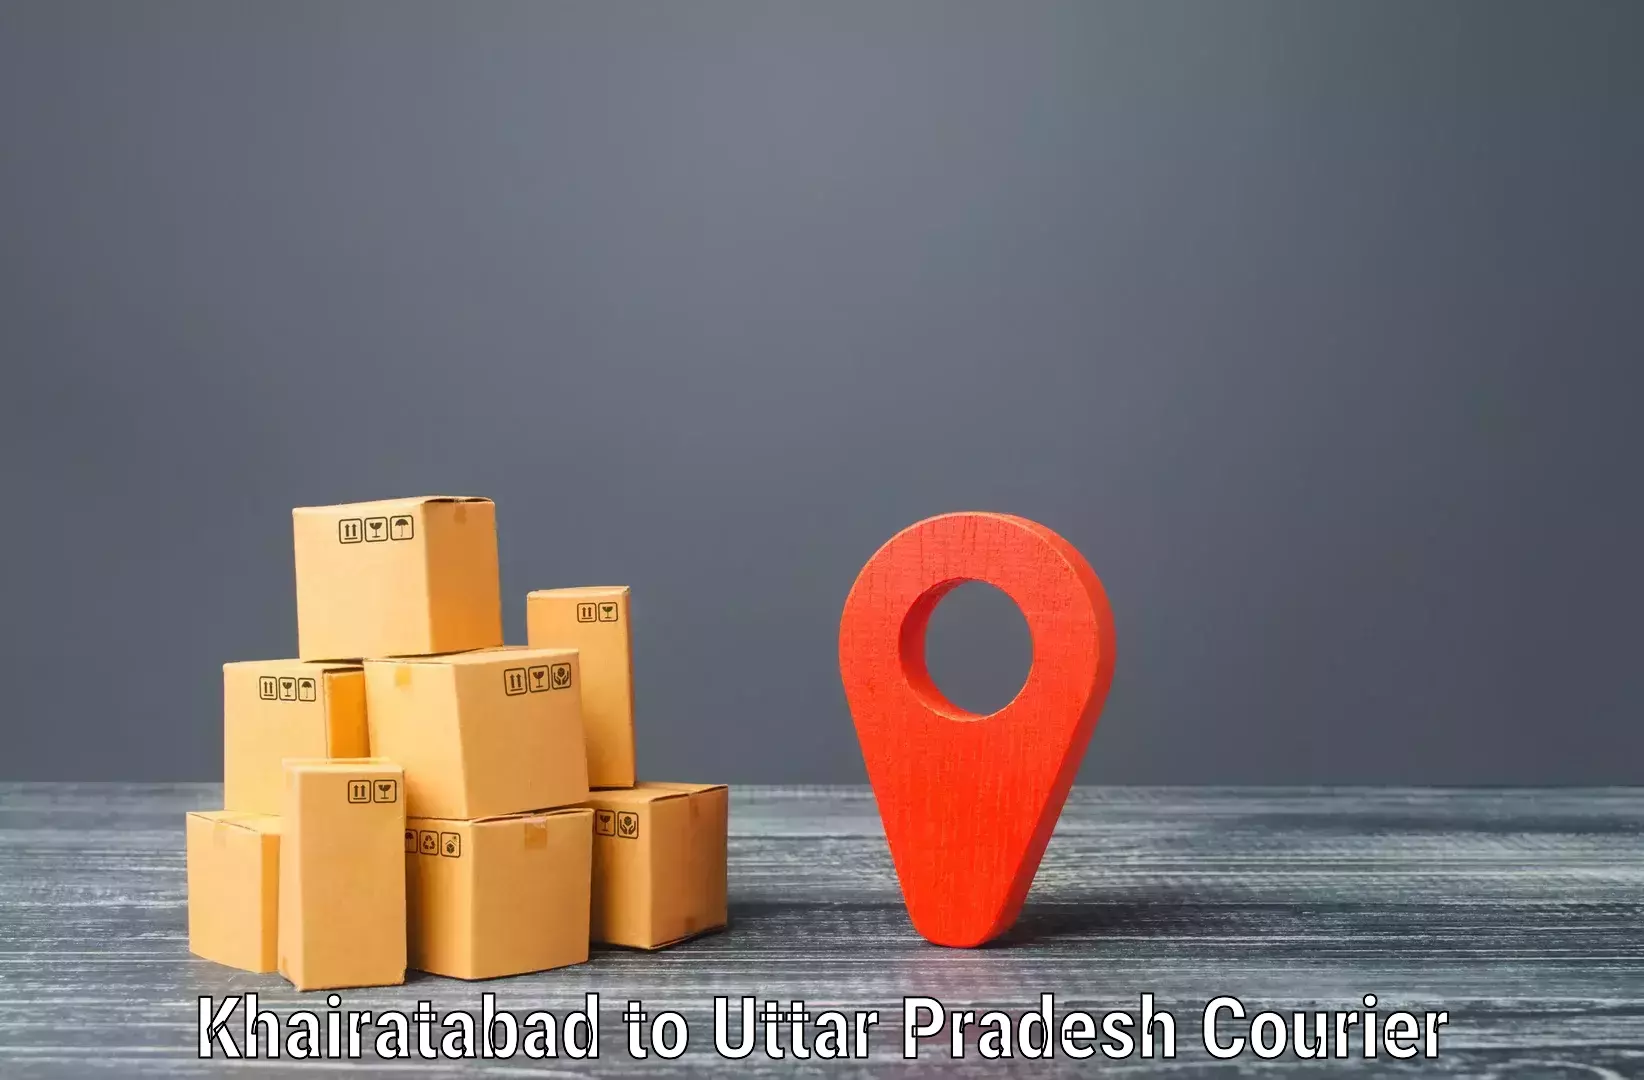 Courier rate comparison in Khairatabad to Uttar Pradesh